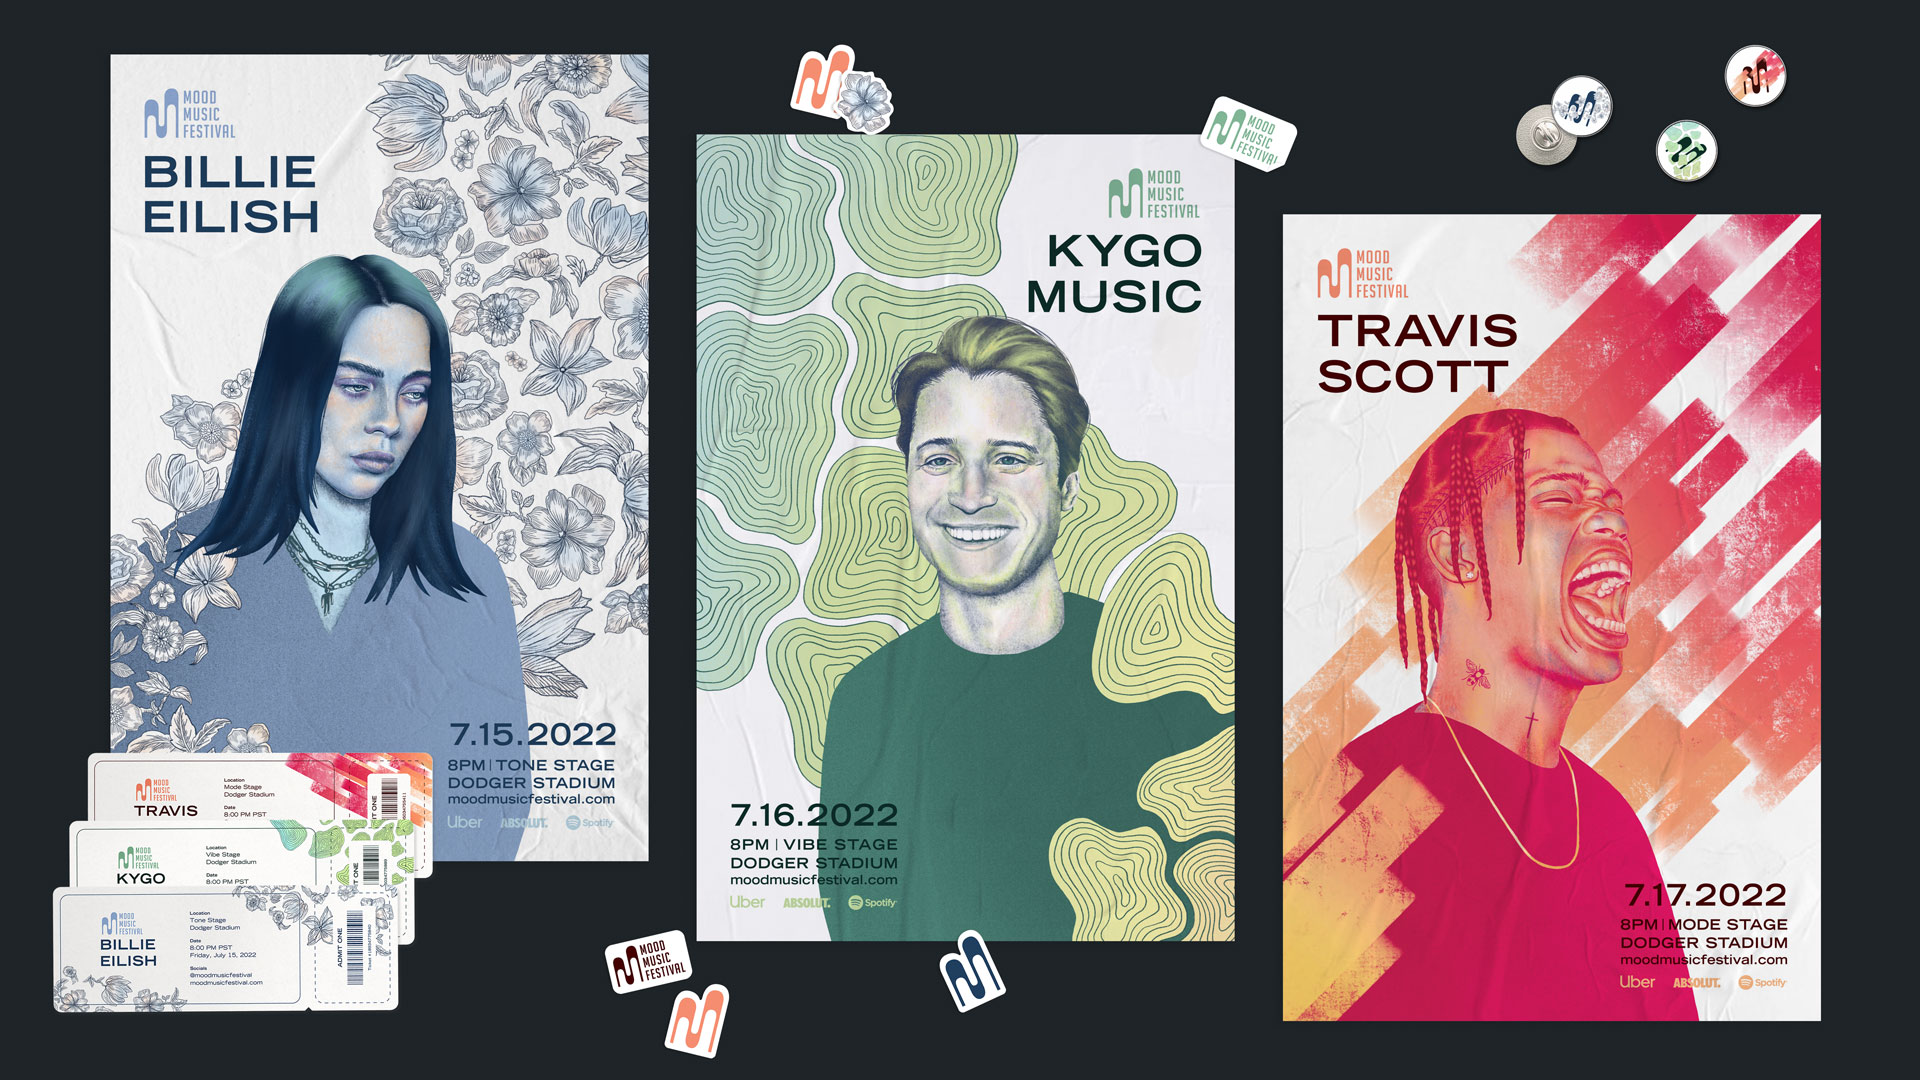 Brand identity, logo design, poster design and illustration for Mood Music Festival. The festival conveys a different mood each day, featuring Billie Eilish, Kygo and Travis Scott.